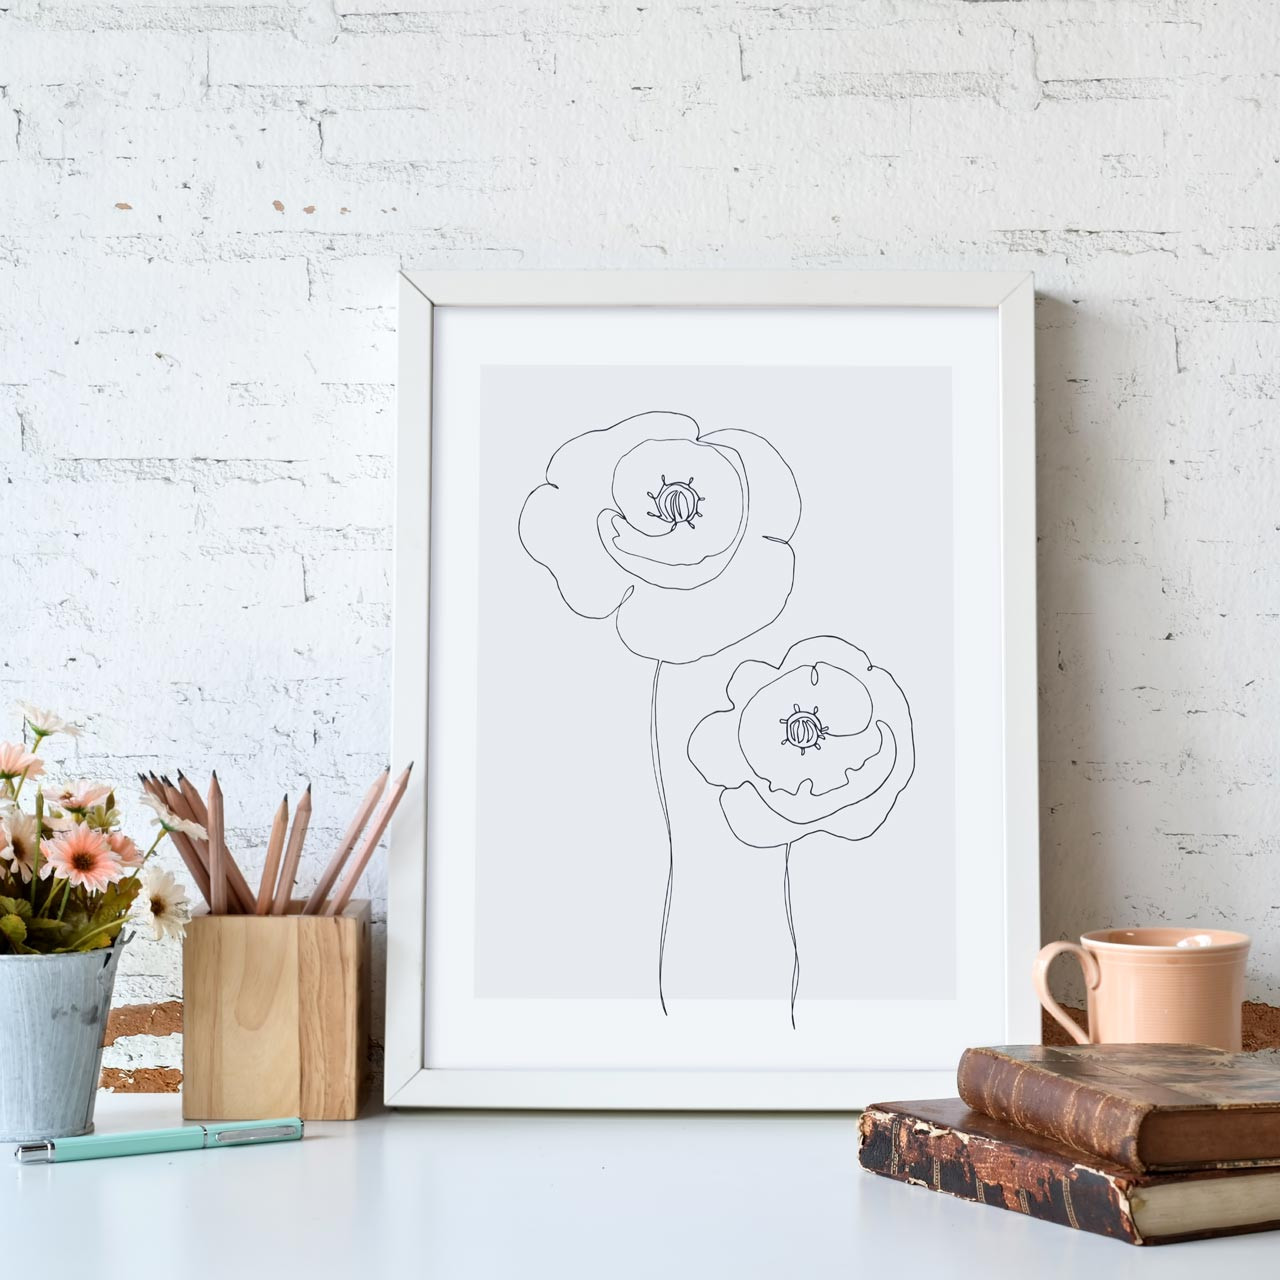 'Single Line Poppies' on Gray, Original Art Print from The Printed Home (Printable)